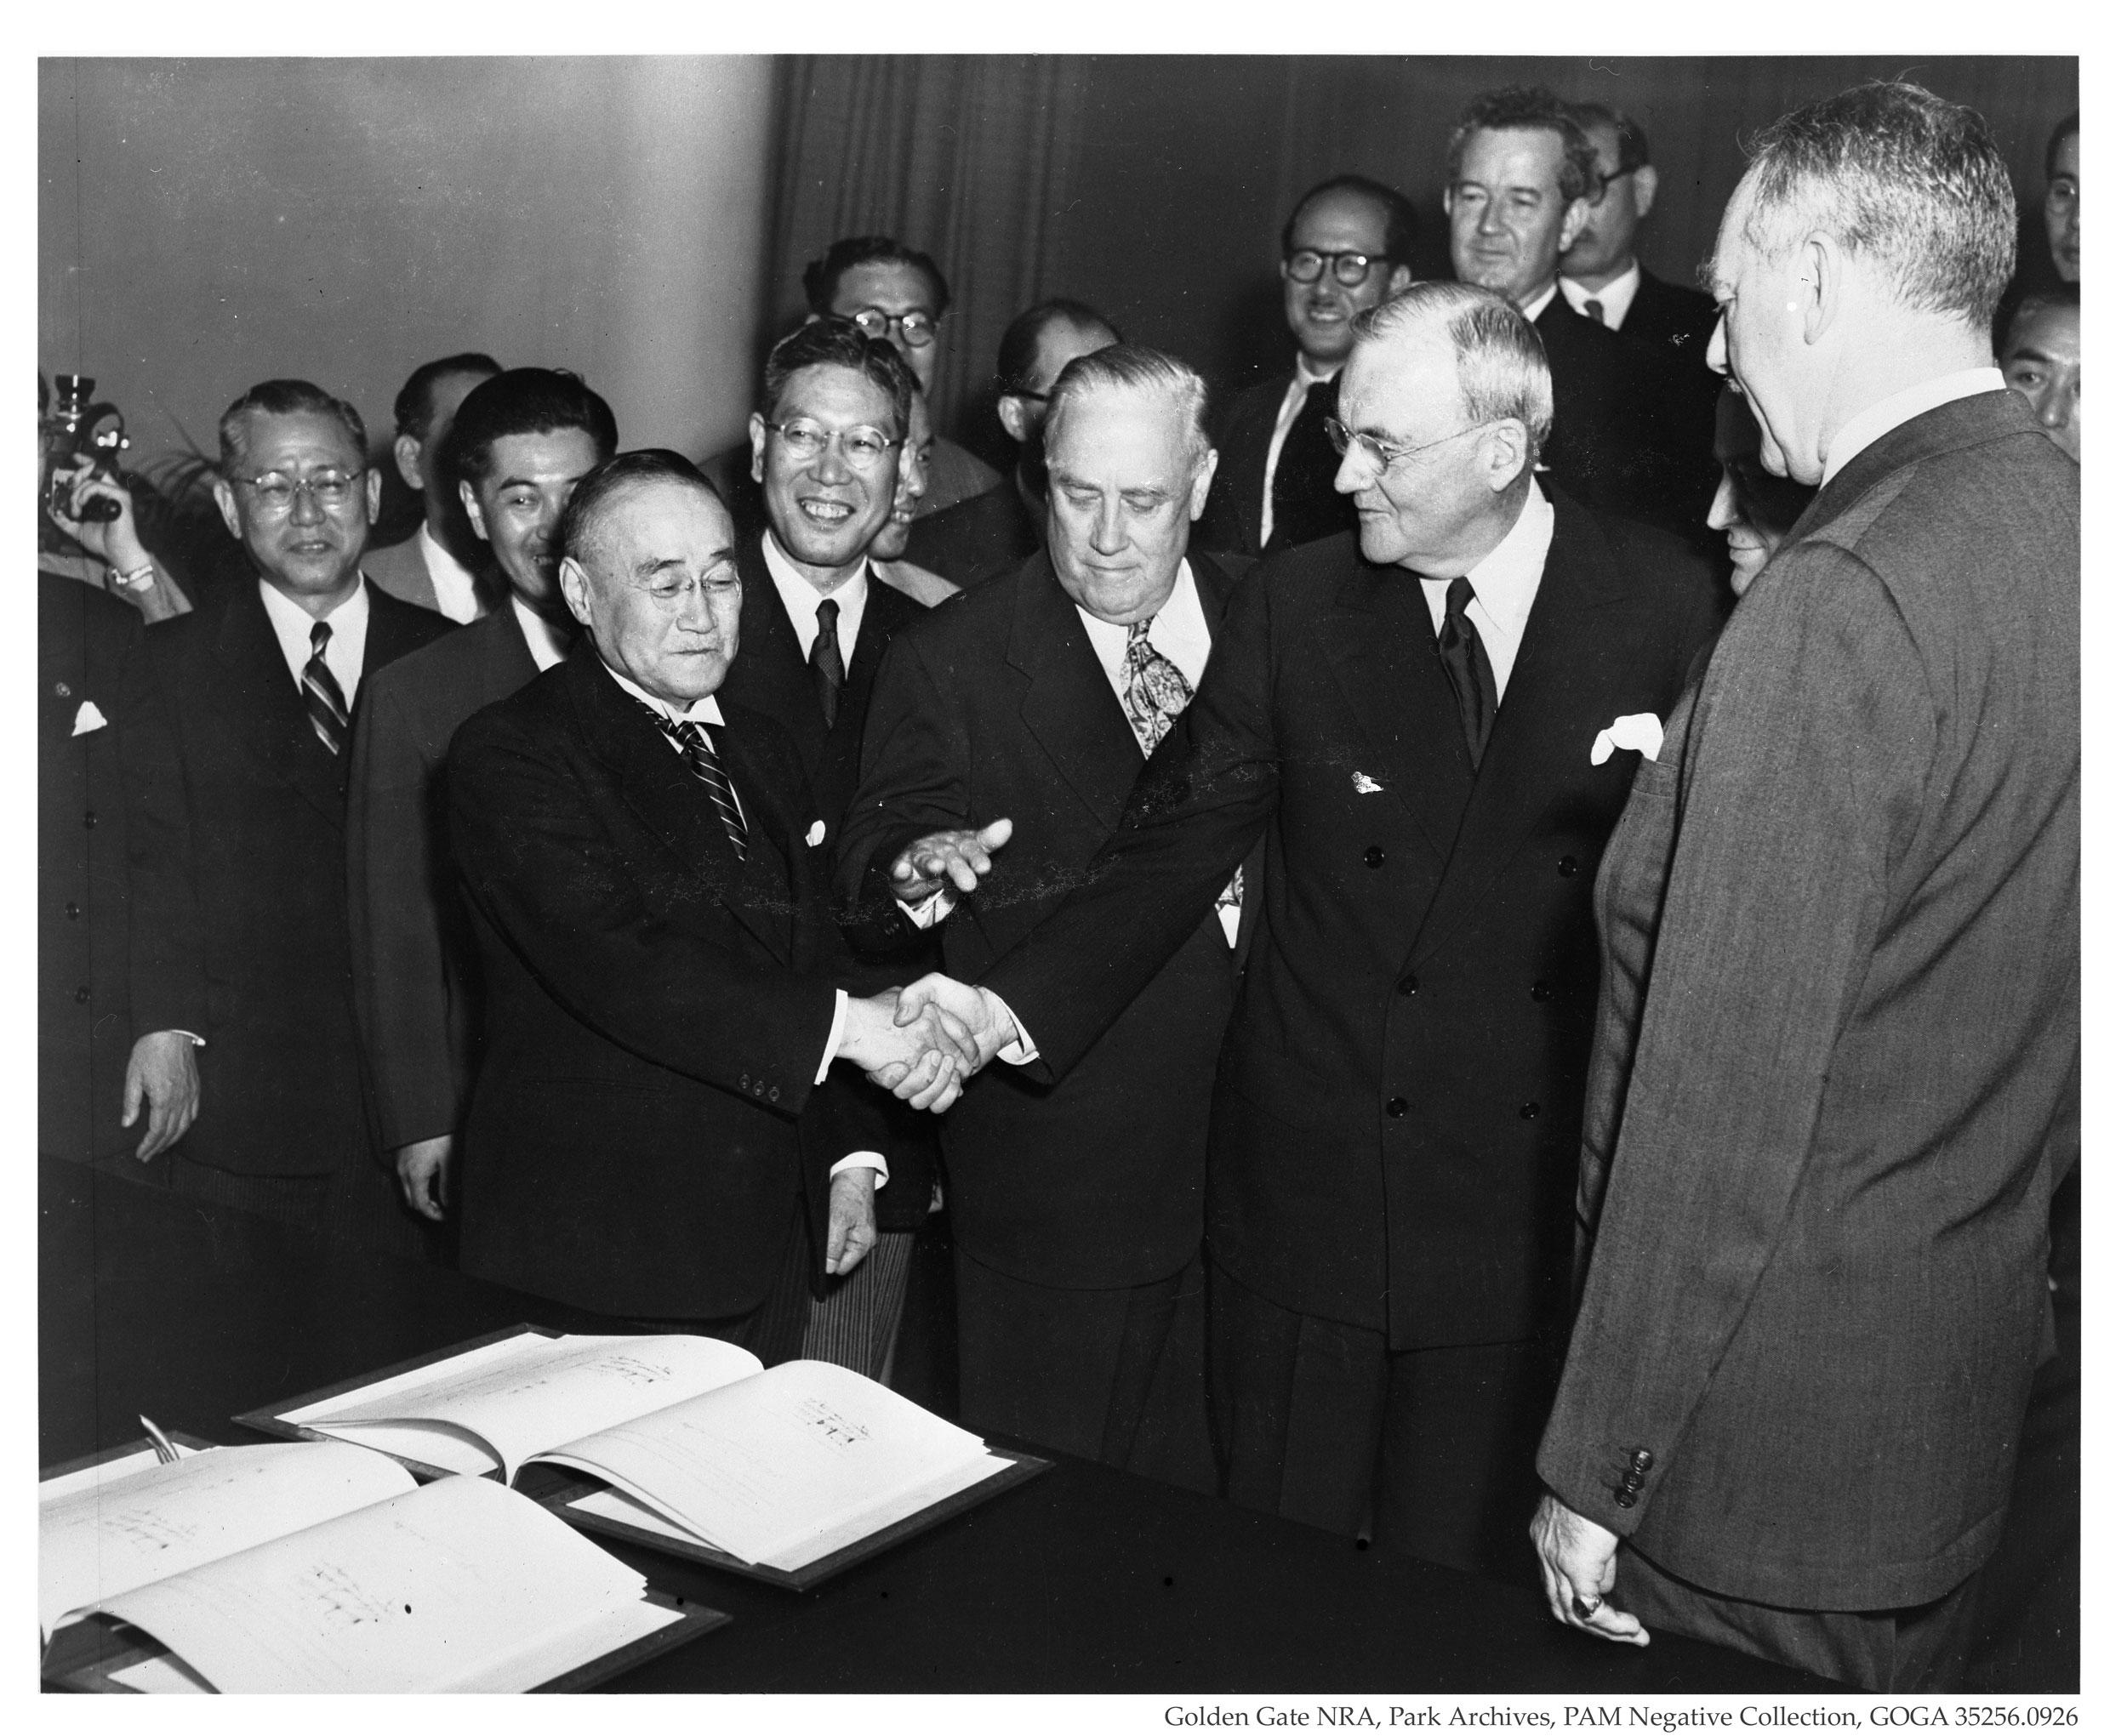 Prime Minister Shigeru Yoshida of Japan shakes hands with John Foster Dulles, chief architect of the treaty, after signing the treaty in 1951. Image courtesy GGNRA Park Archives.